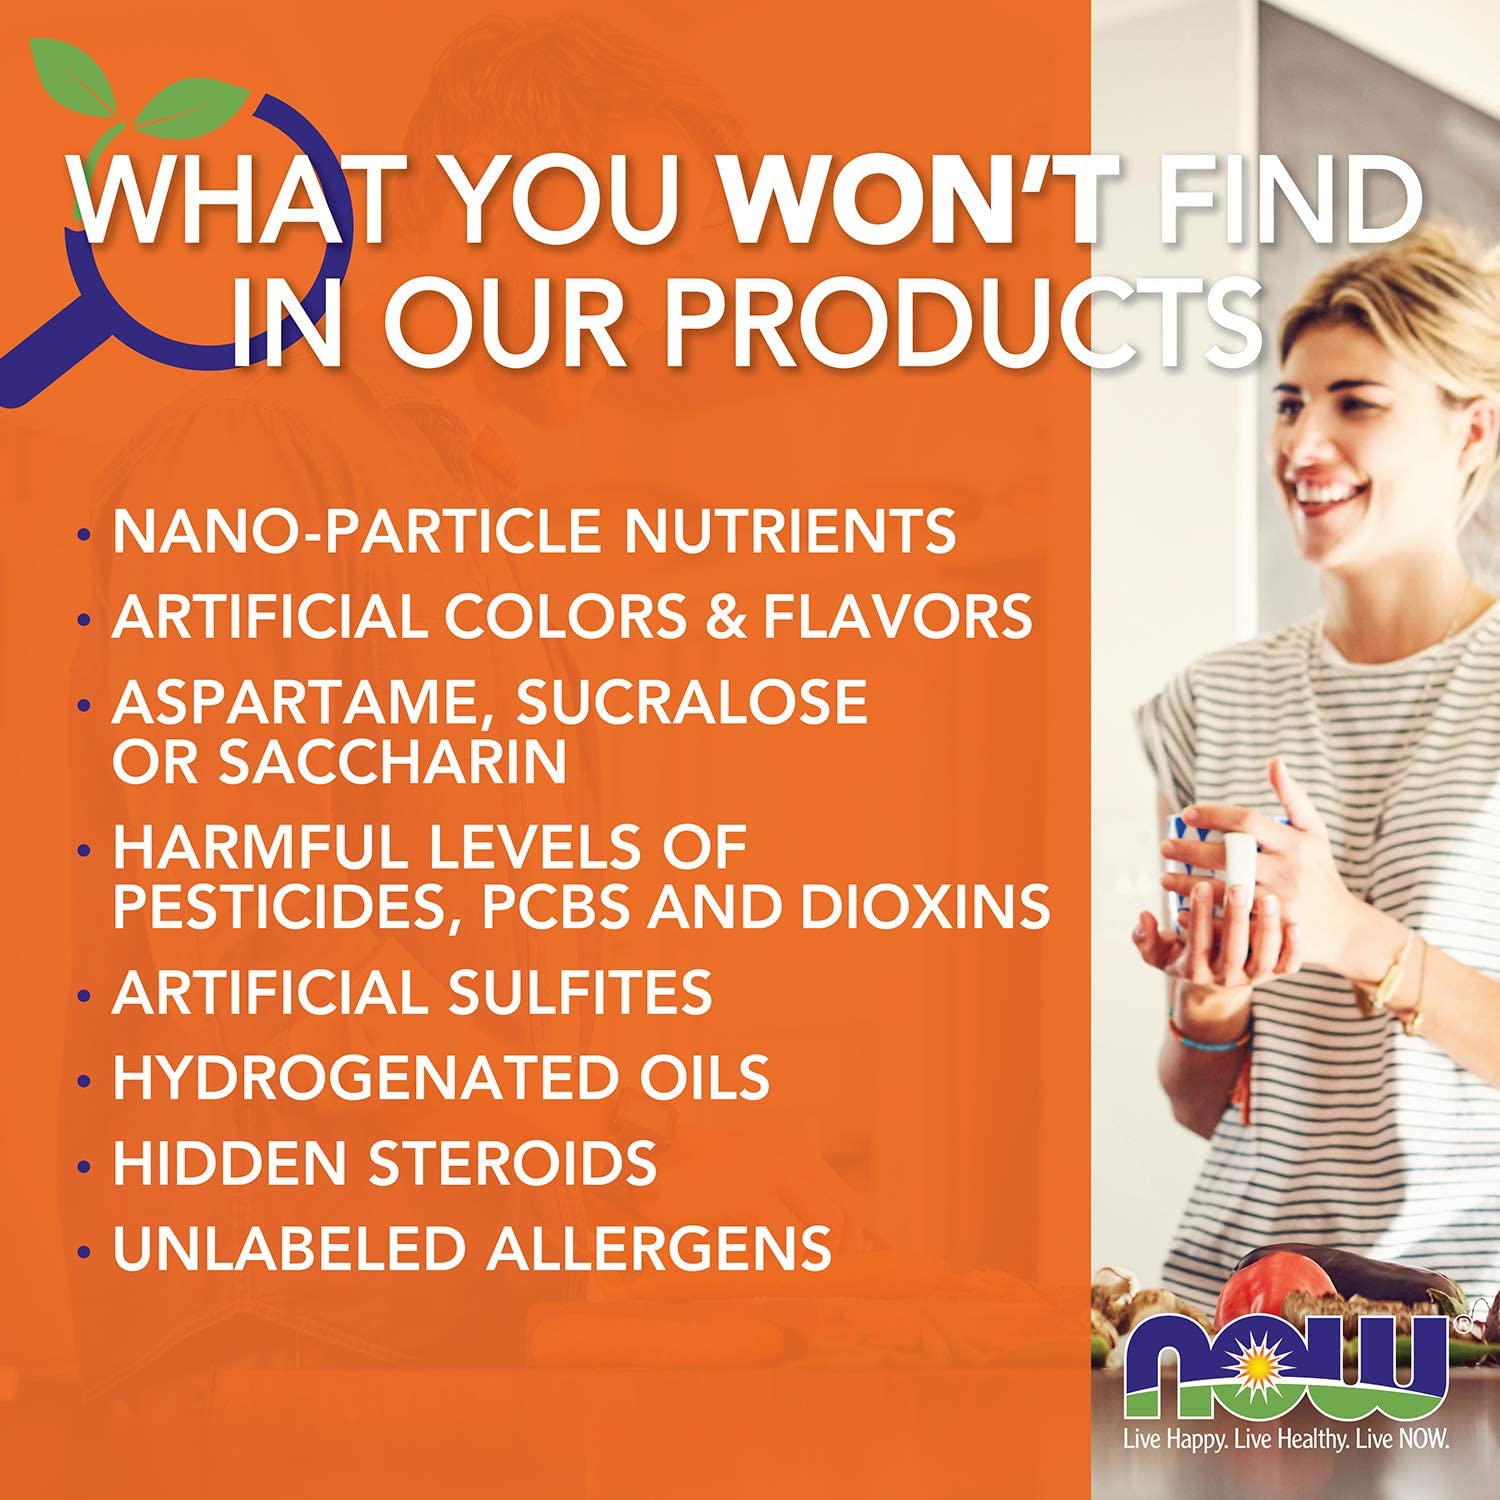 NOW FOODS - What you won't find in our products